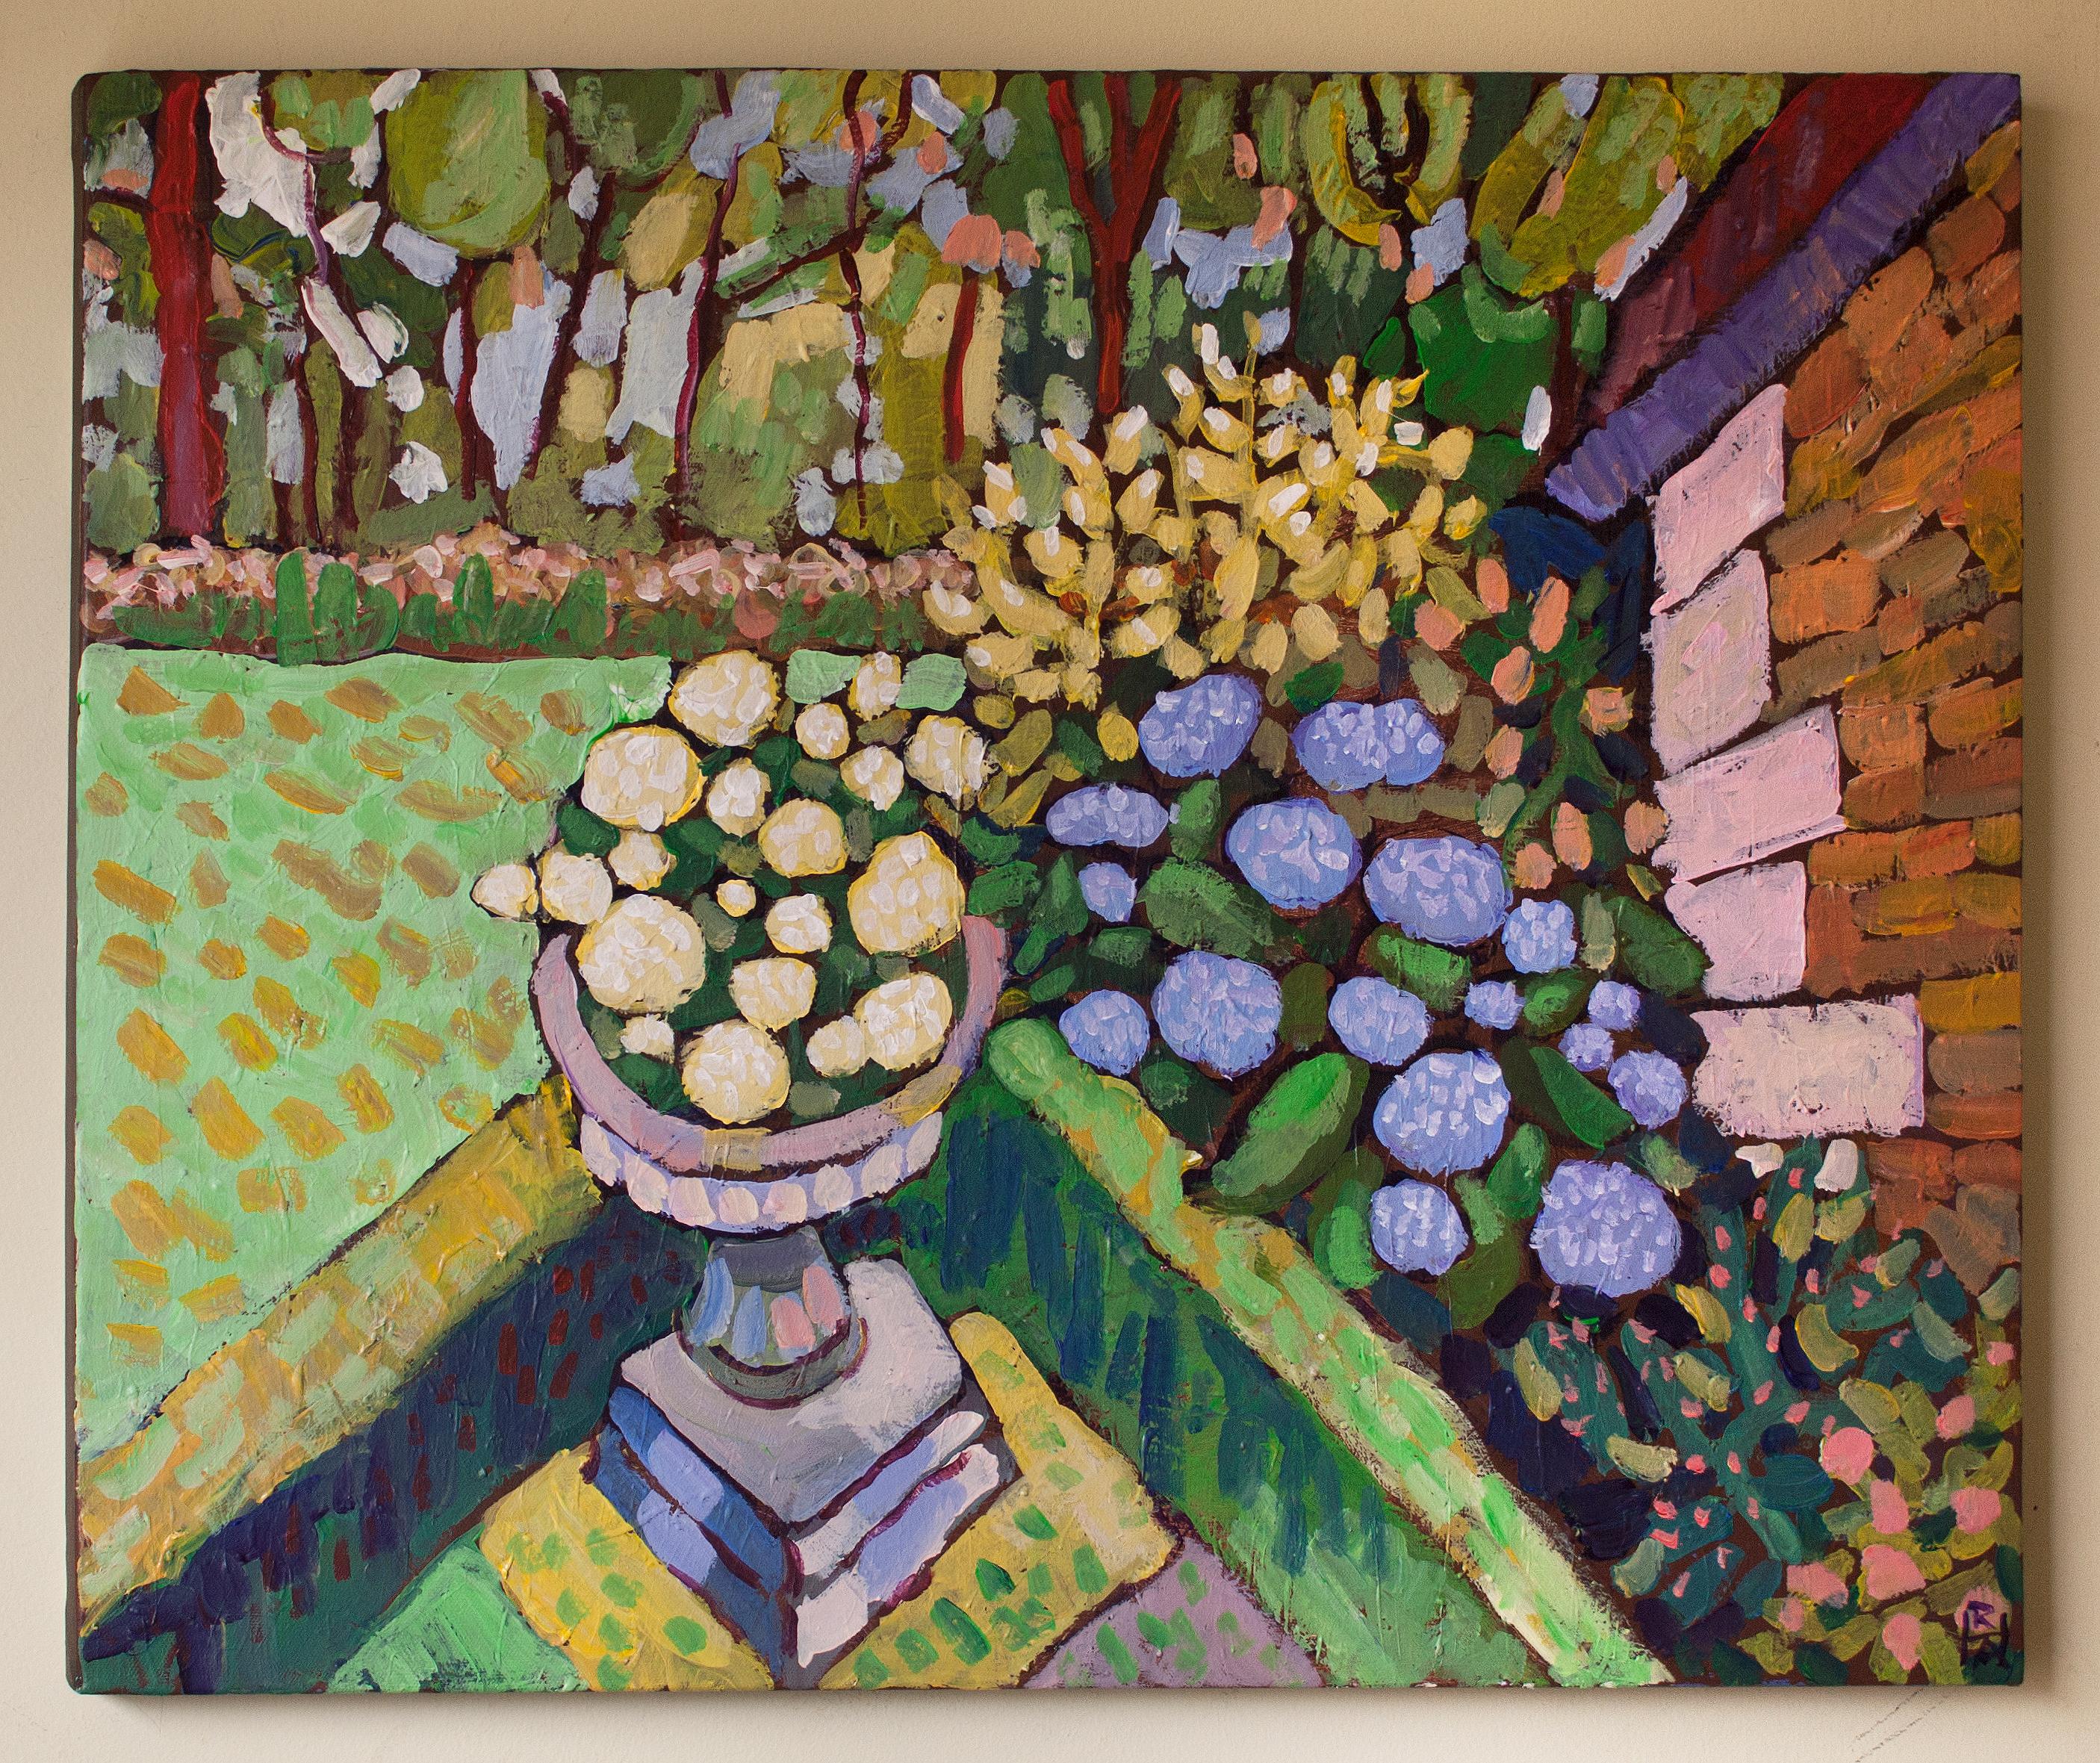 <p>Artist Comments<br>Think of this piece as a Fauvist update of a formal garden scene. The perspective has been altered radically by flattening the picture plane in order to focus attention on the flowers in the center. The angle of the roof